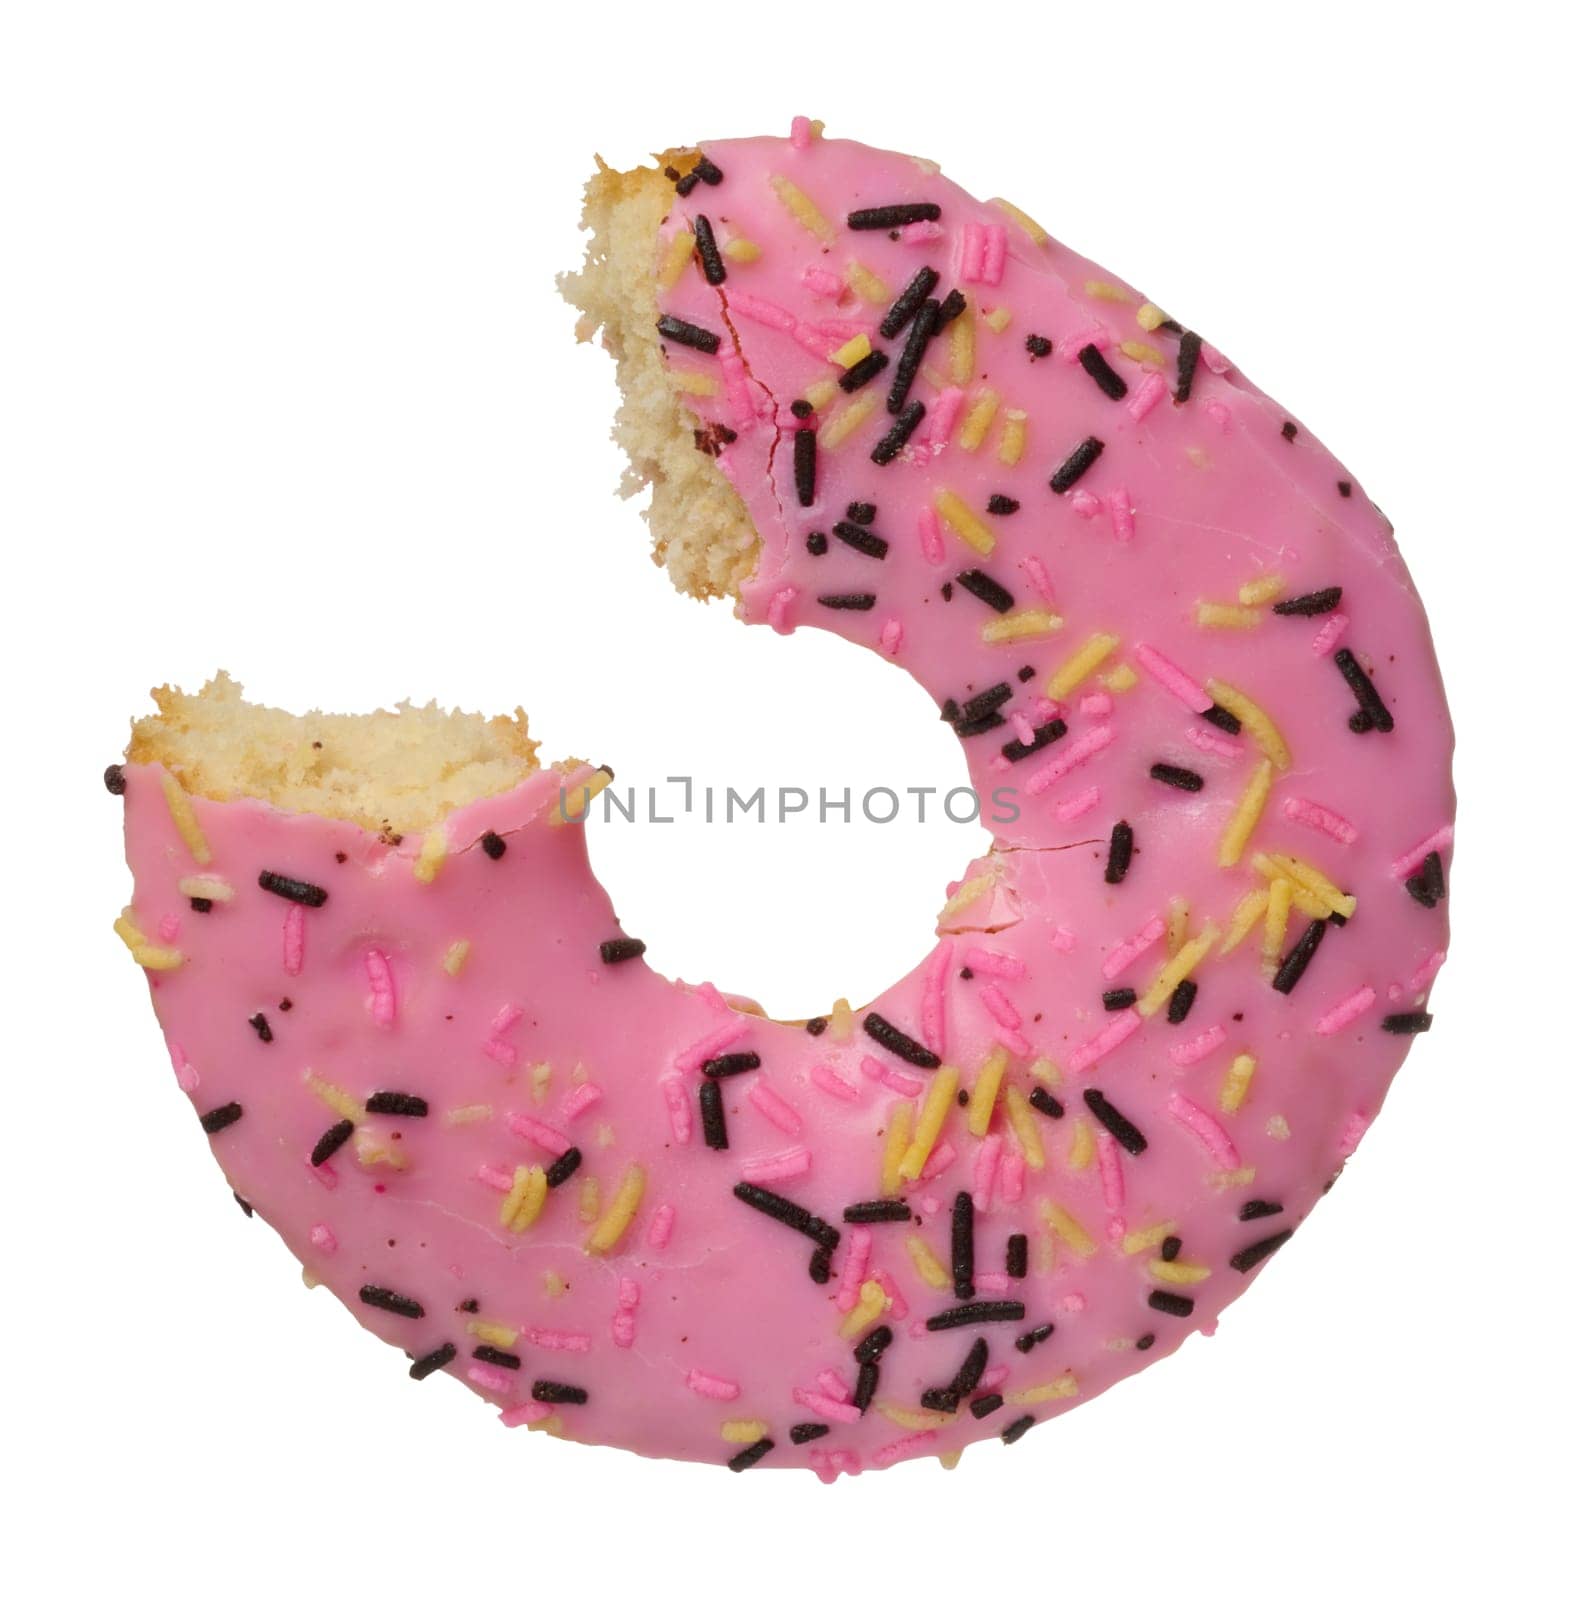 The donut is covered with pink glaze and sprinkled with colorful sprinkles, a piece is taken out.  by ndanko